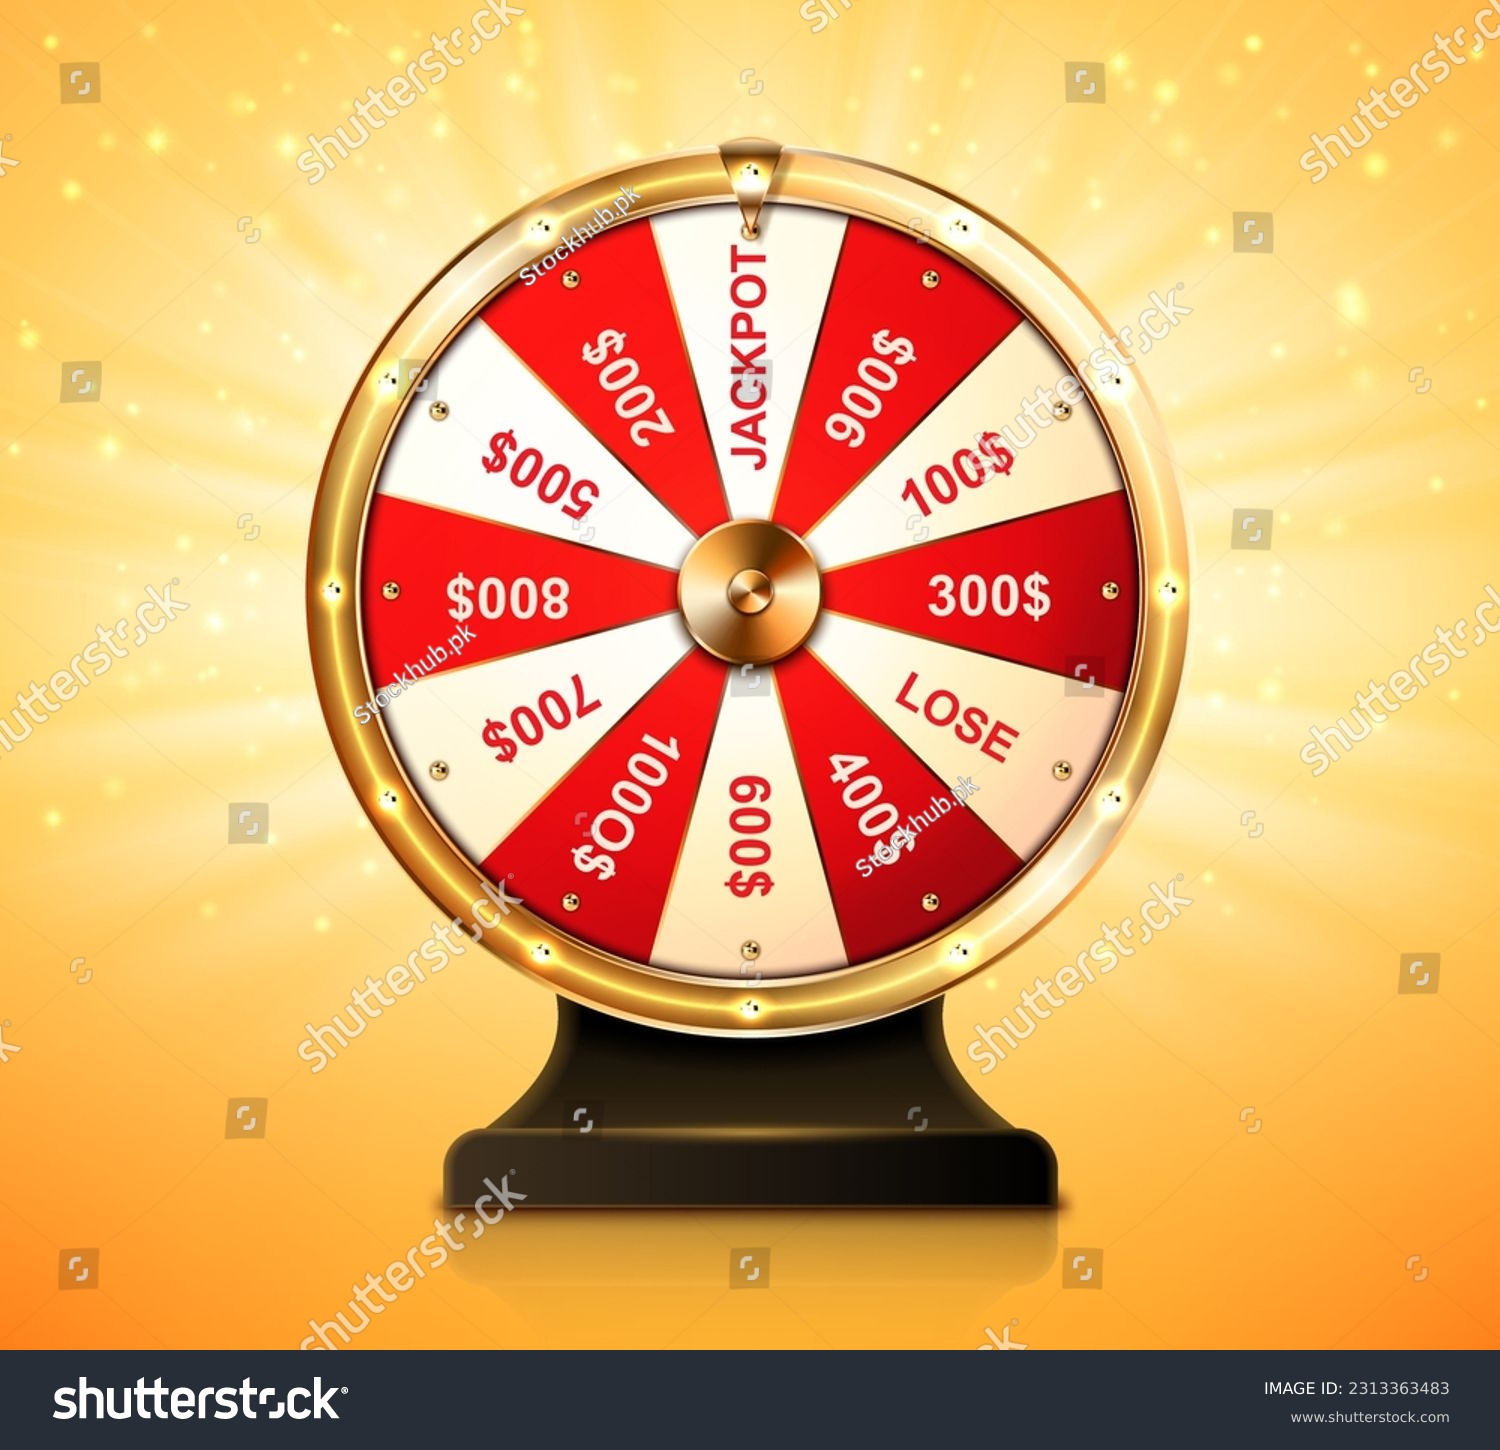 Golden wheel of fortune for lottery game or casino. Chance to win prize in lucky roulette. Vector realistic illustration of gold fortune wheel with money numbers and jackpot on shiny background #2313363483